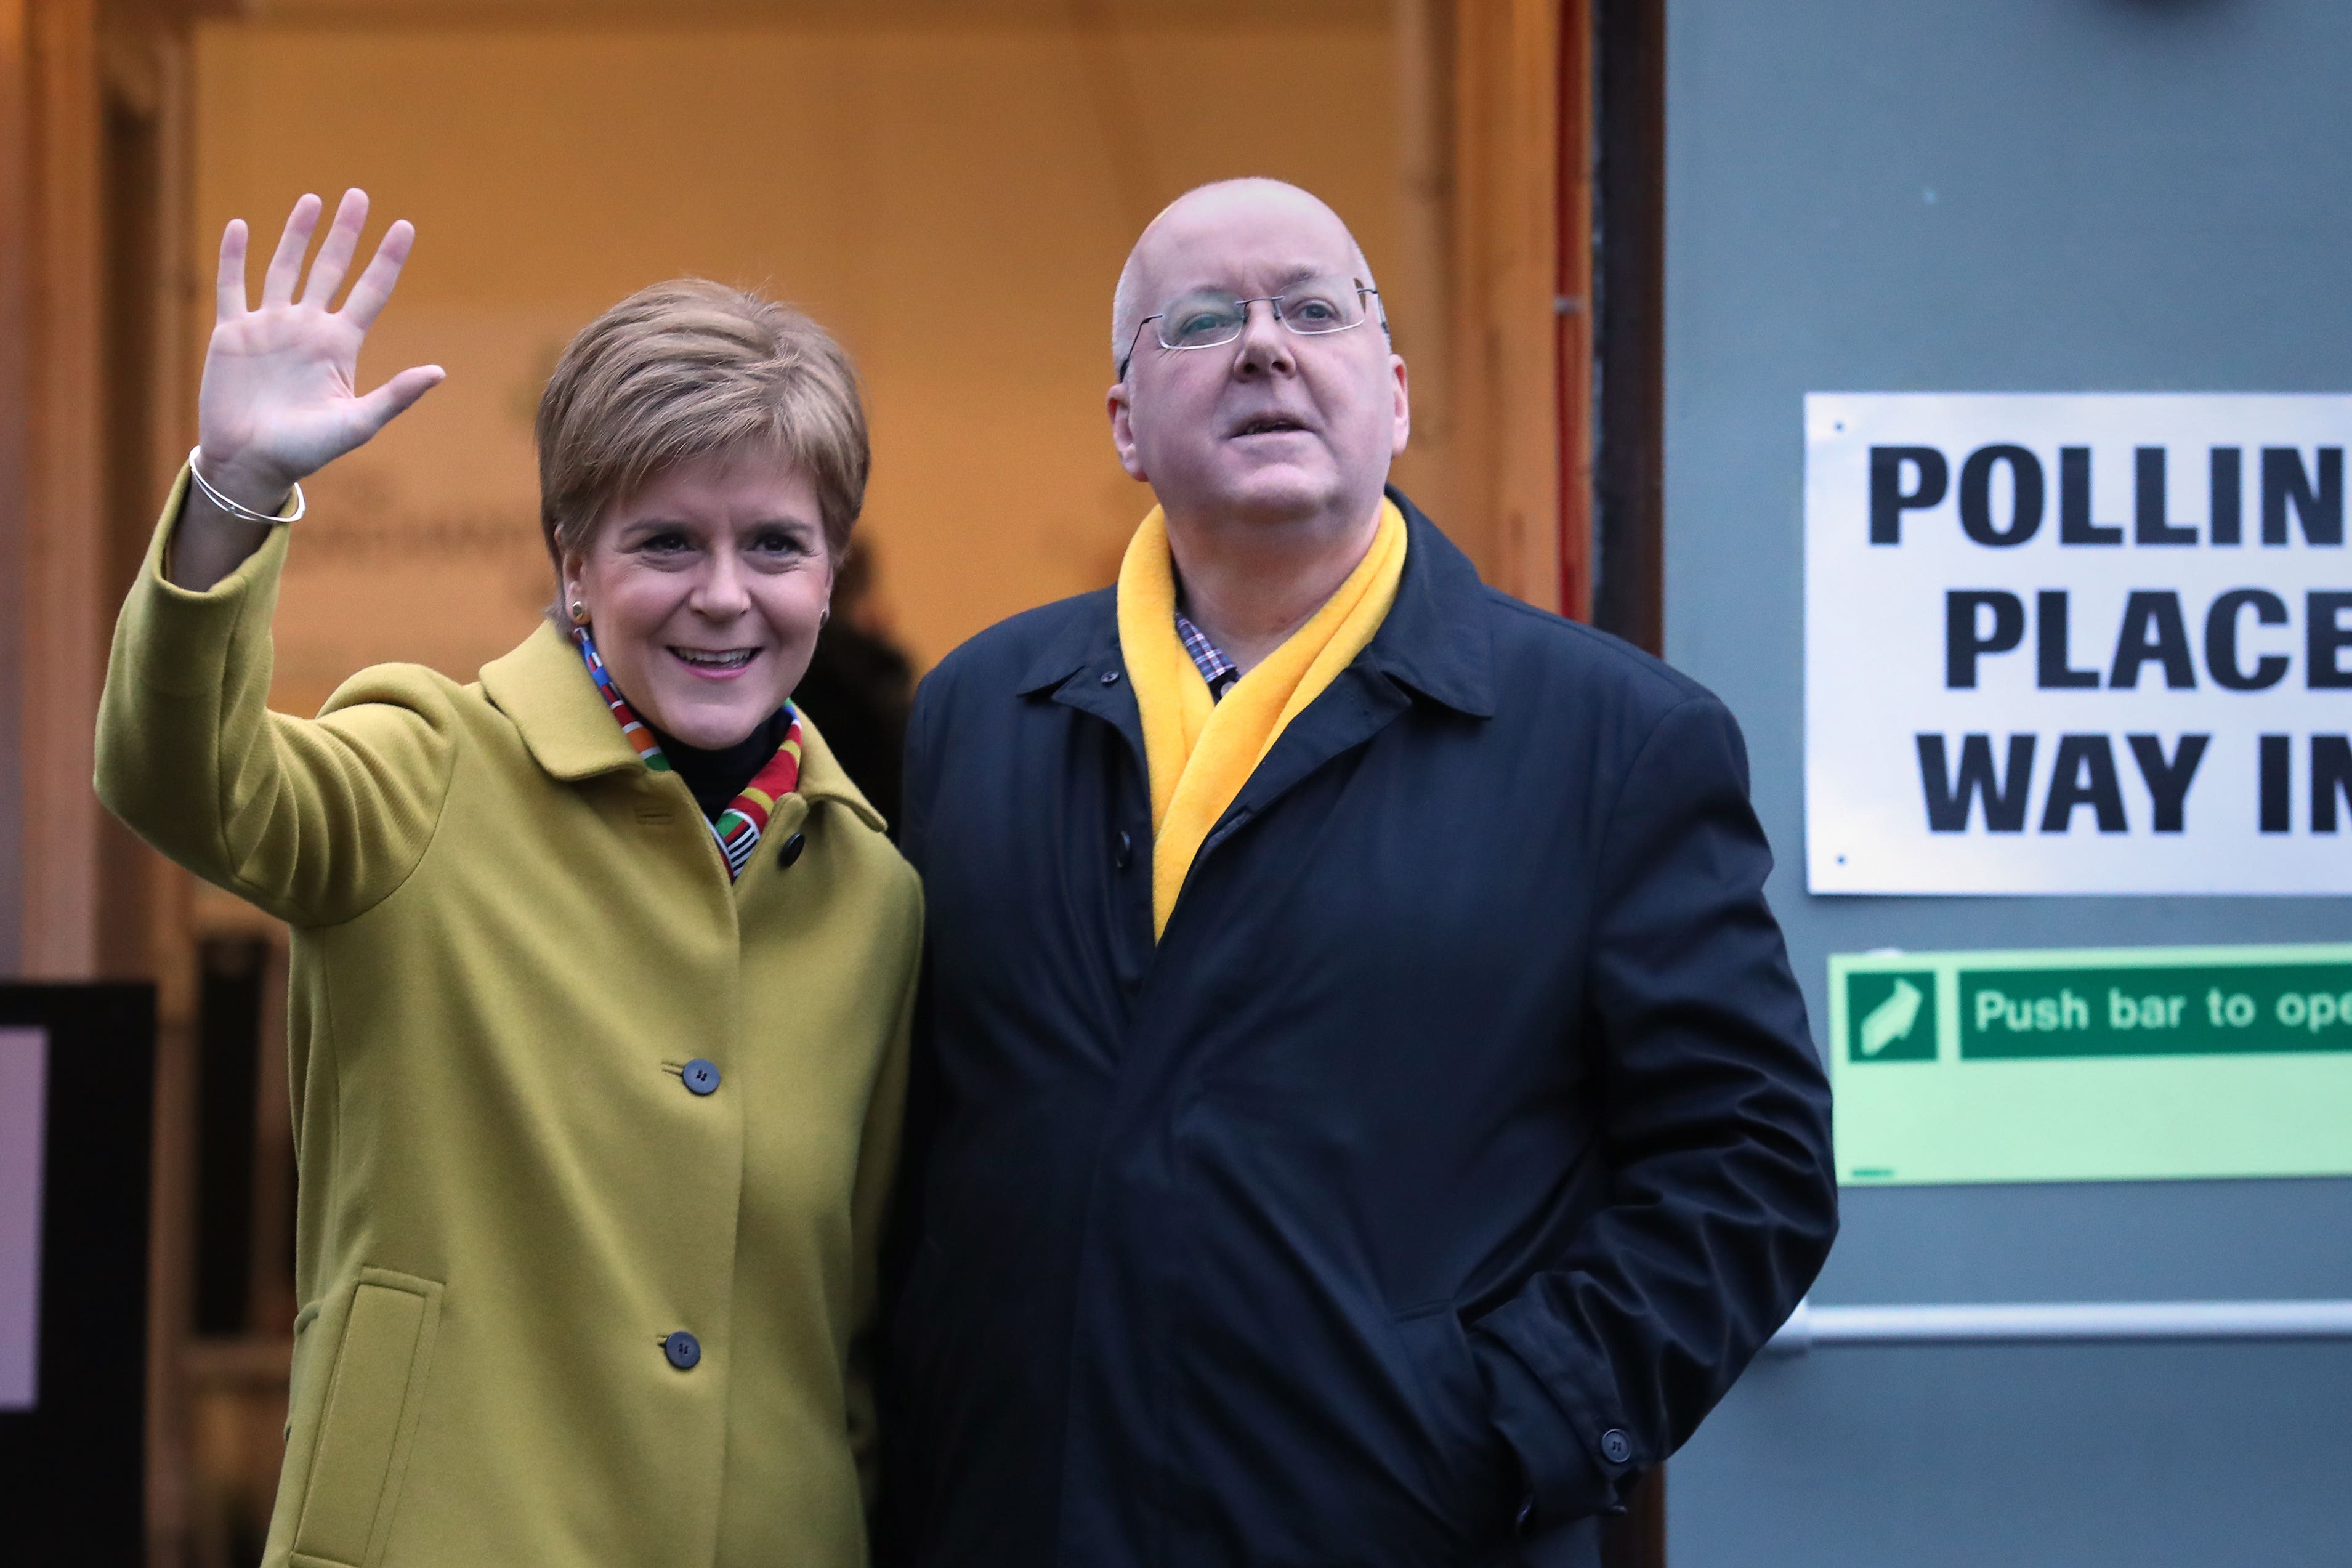 Police searched the South Lanarkshire home of Nicola Sturgeon and Peter Murrell